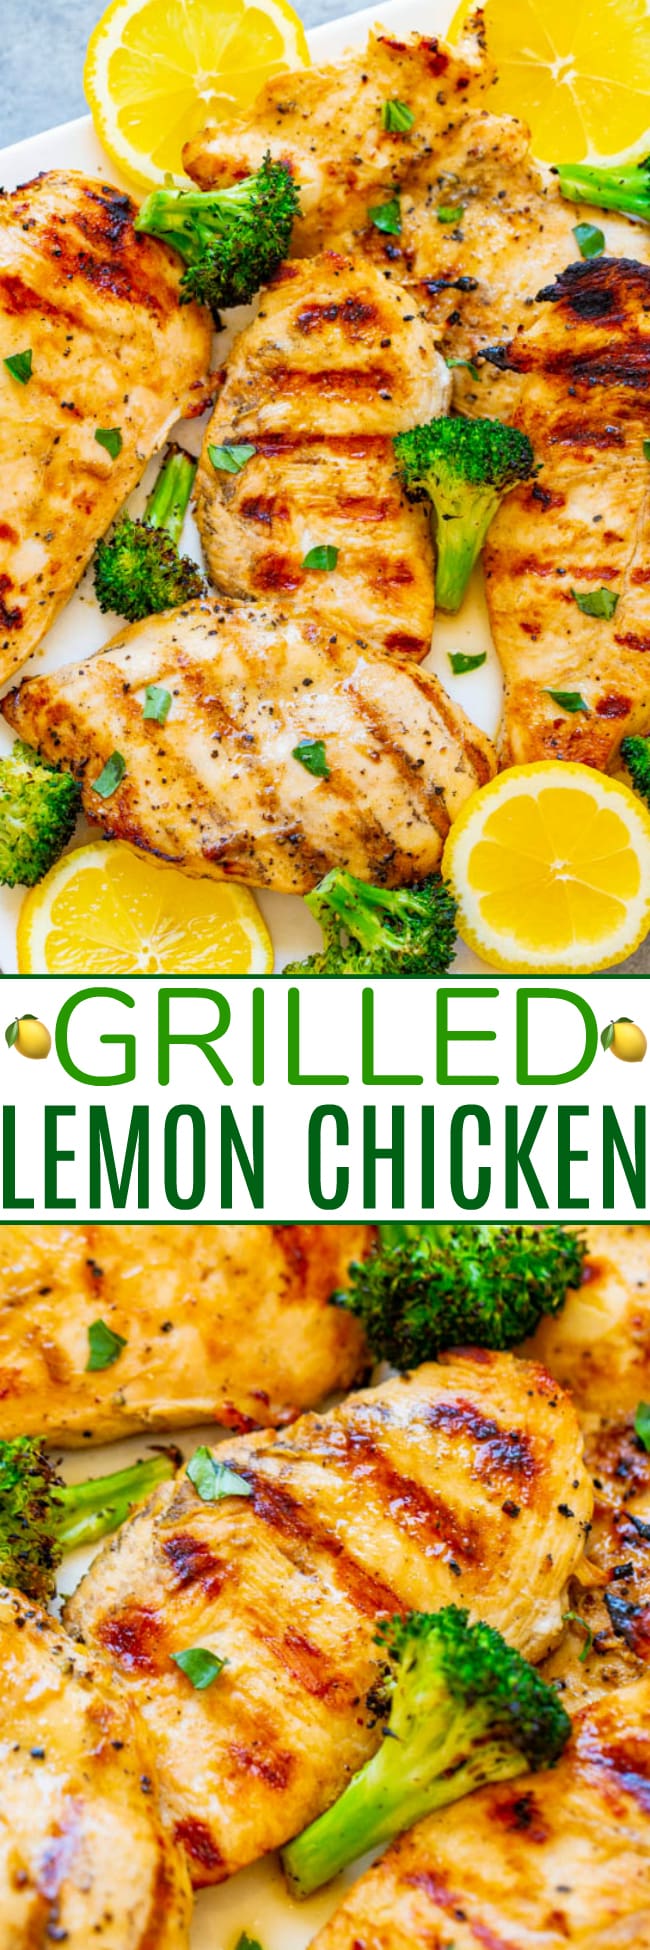 Grilled Lemon Chicken - EASY, ready in 10 minutes, and the chicken is so TENDER, juicy, and full of LEMON flavor!! With grilled broccoli on the side, this is a HEALTHY recipe perfect for swimsuit season that tastes AMAZING!!